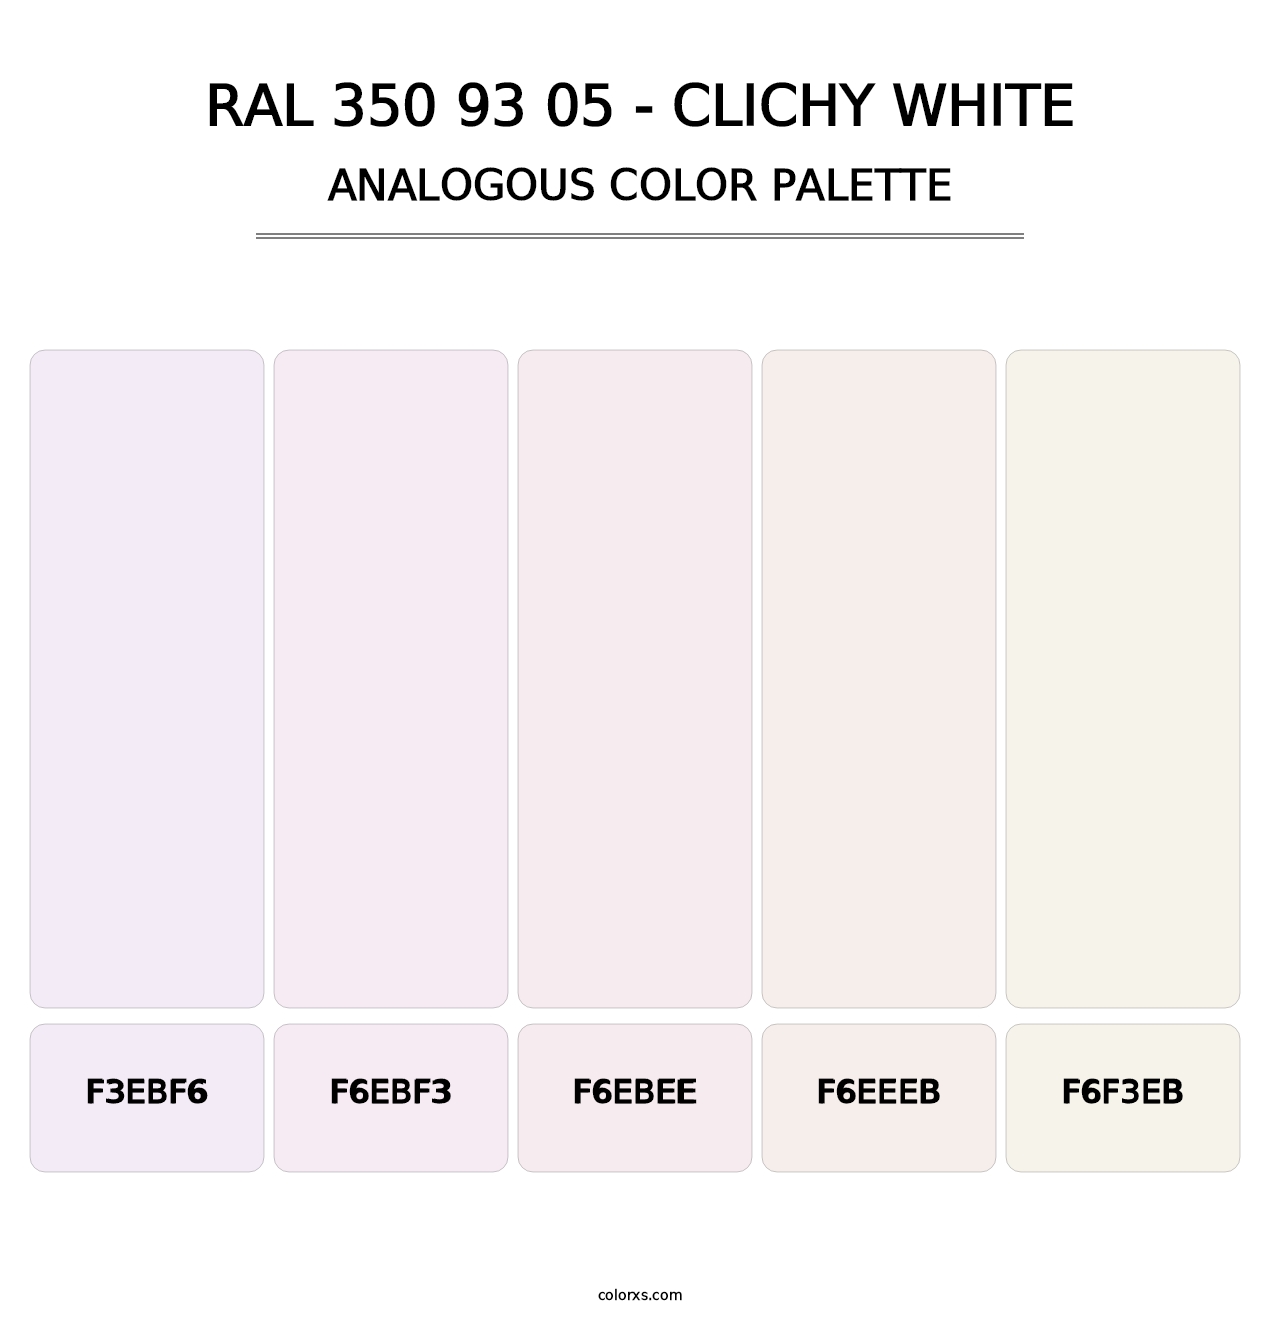 RAL 350 93 05 - Clichy White - Analogous Color Palette